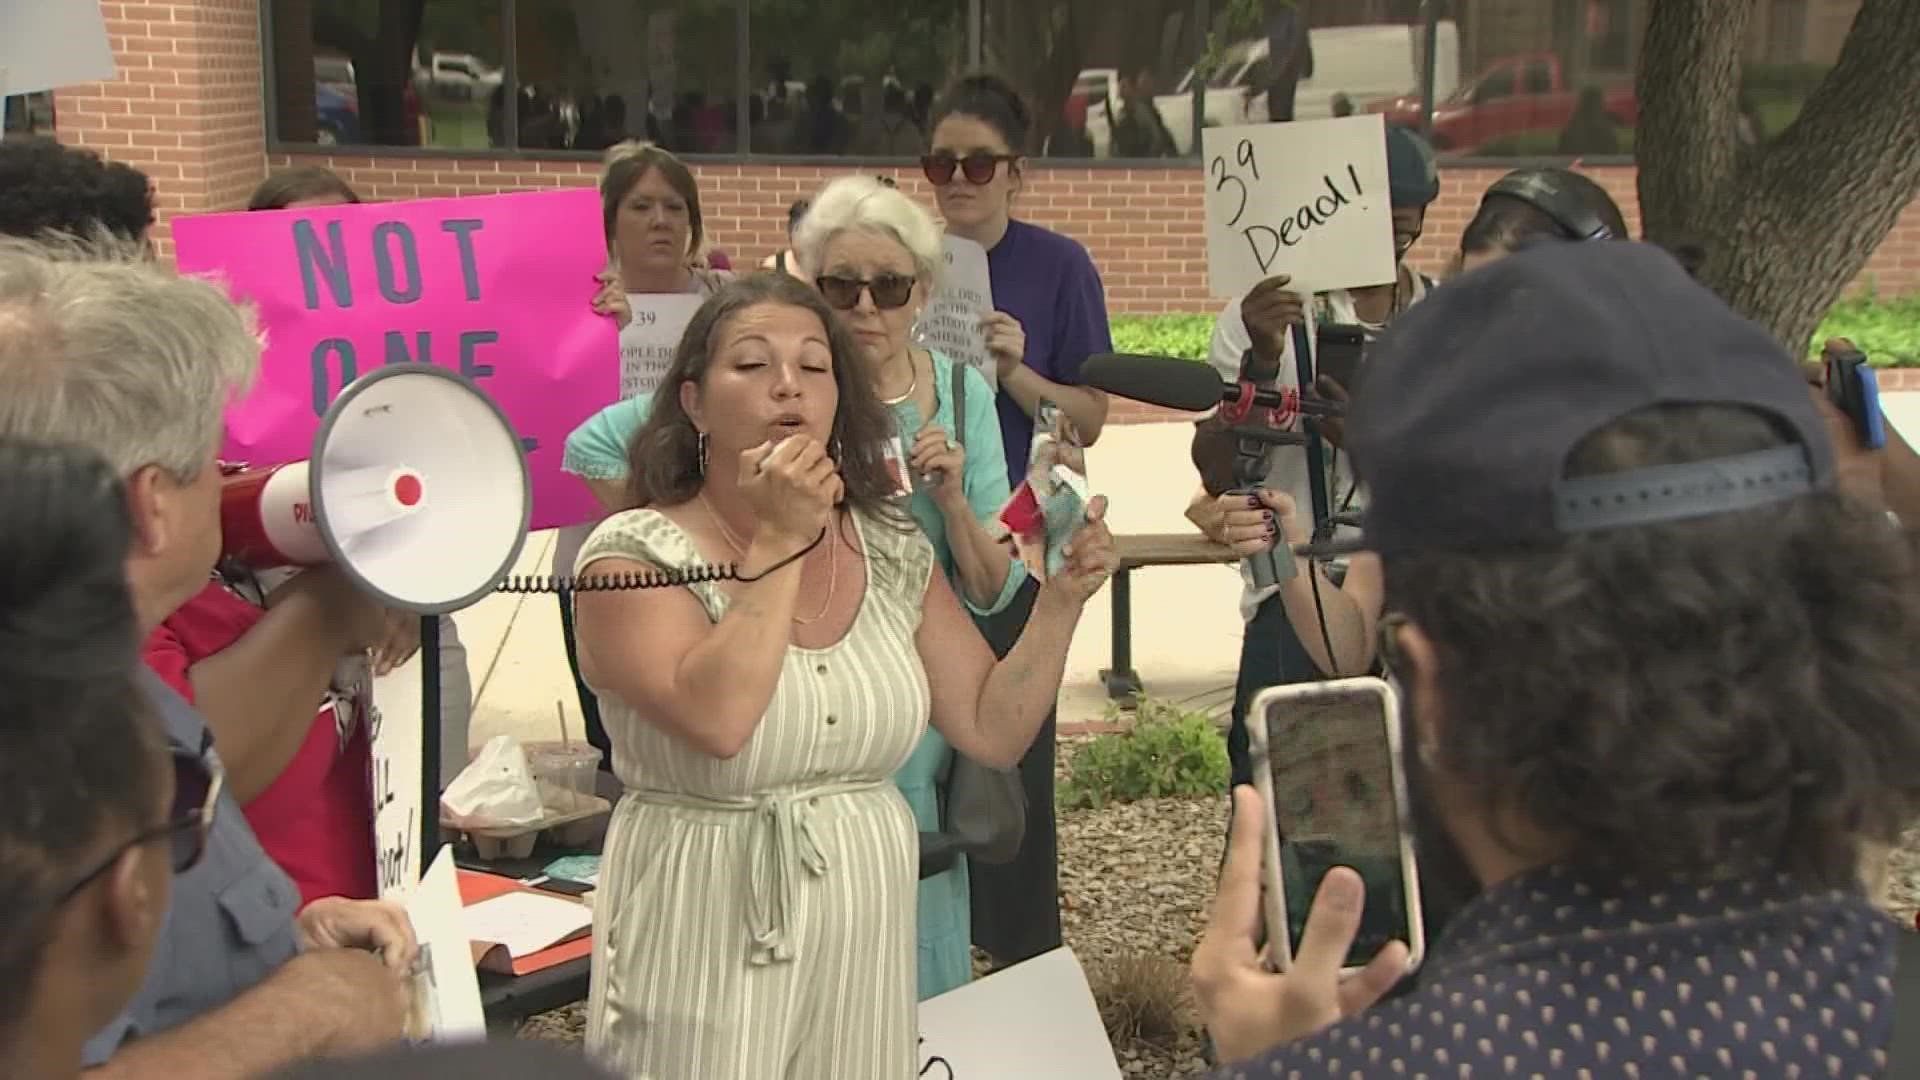 On Tuesday, May 10, Salinas and her family, along with people they've never met, held a march at the Tarrant County courthouse to protest Masten's treatment.